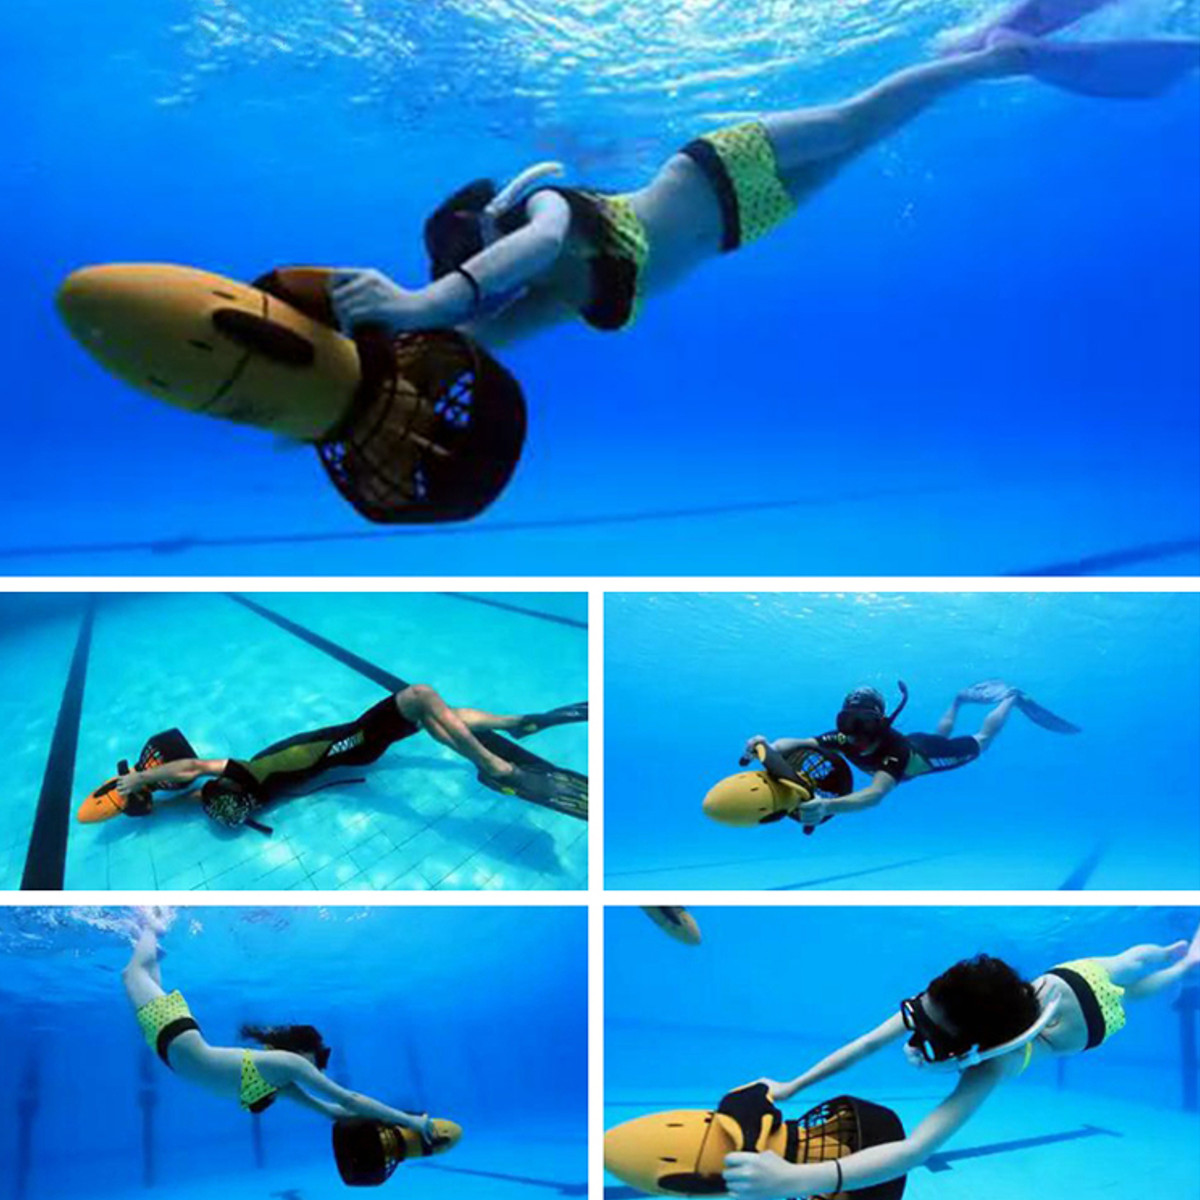 300W-Electric-Sea-Scooter-Diving-Equipment-Underwater-Propeller-Diving-Pool-Scooter-for-Swimming-1289088